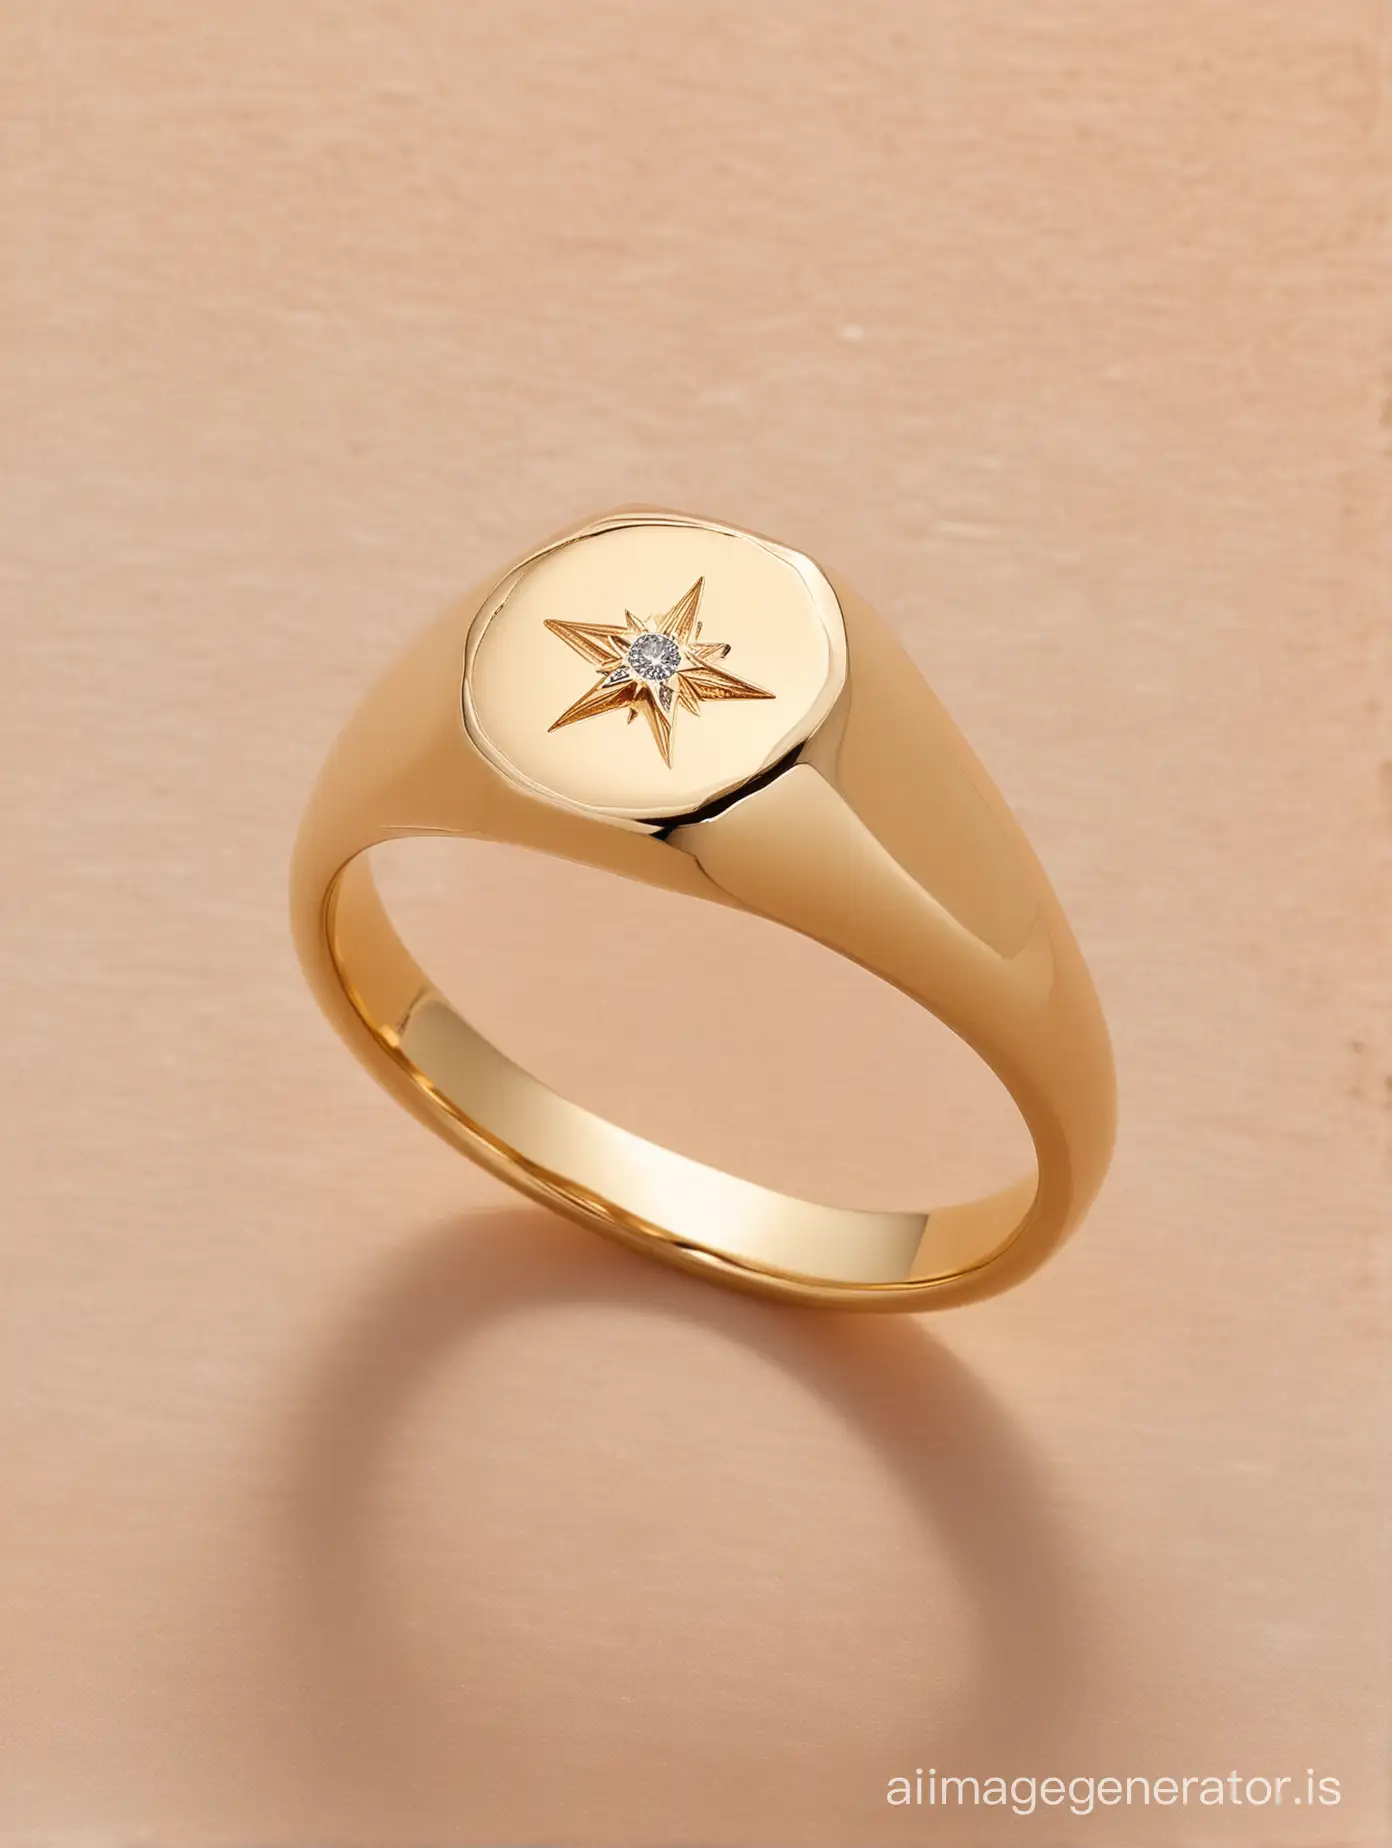 A classic polished signet ring with a domed surface. The top of the ring is all metal gold with only at the very middle center of the top of the ring rests small diamond set within a small star engraved in the metal.
The background is a pastel beige shade, reminiscent of golden hour sky sunset.